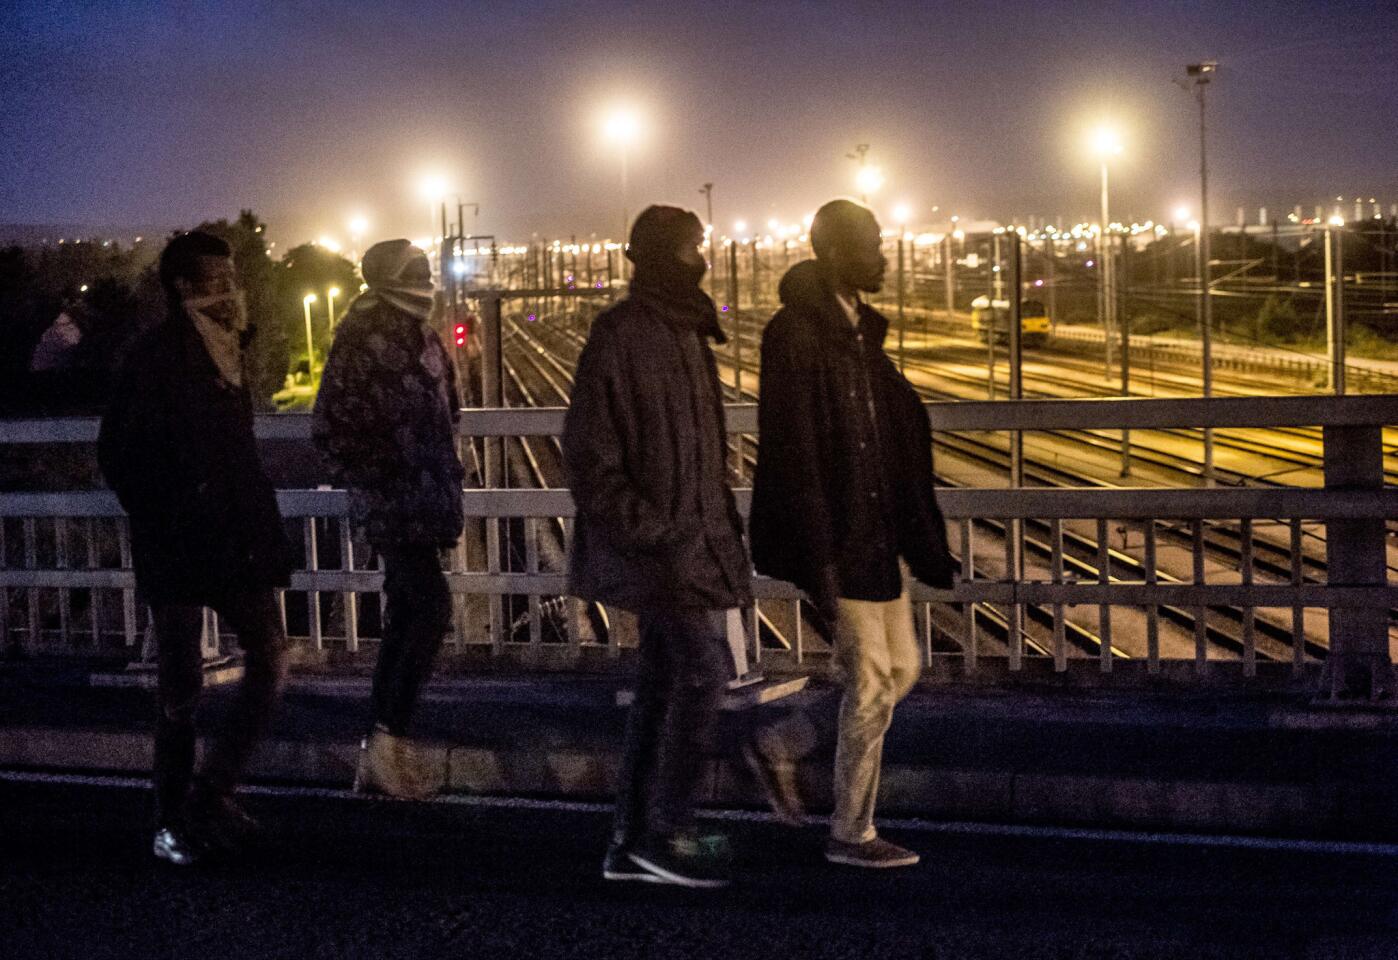 Migrants cross a bridge over the railway tracks of the Eurotunnel terminal on July 28, 2015 in Calais, France.